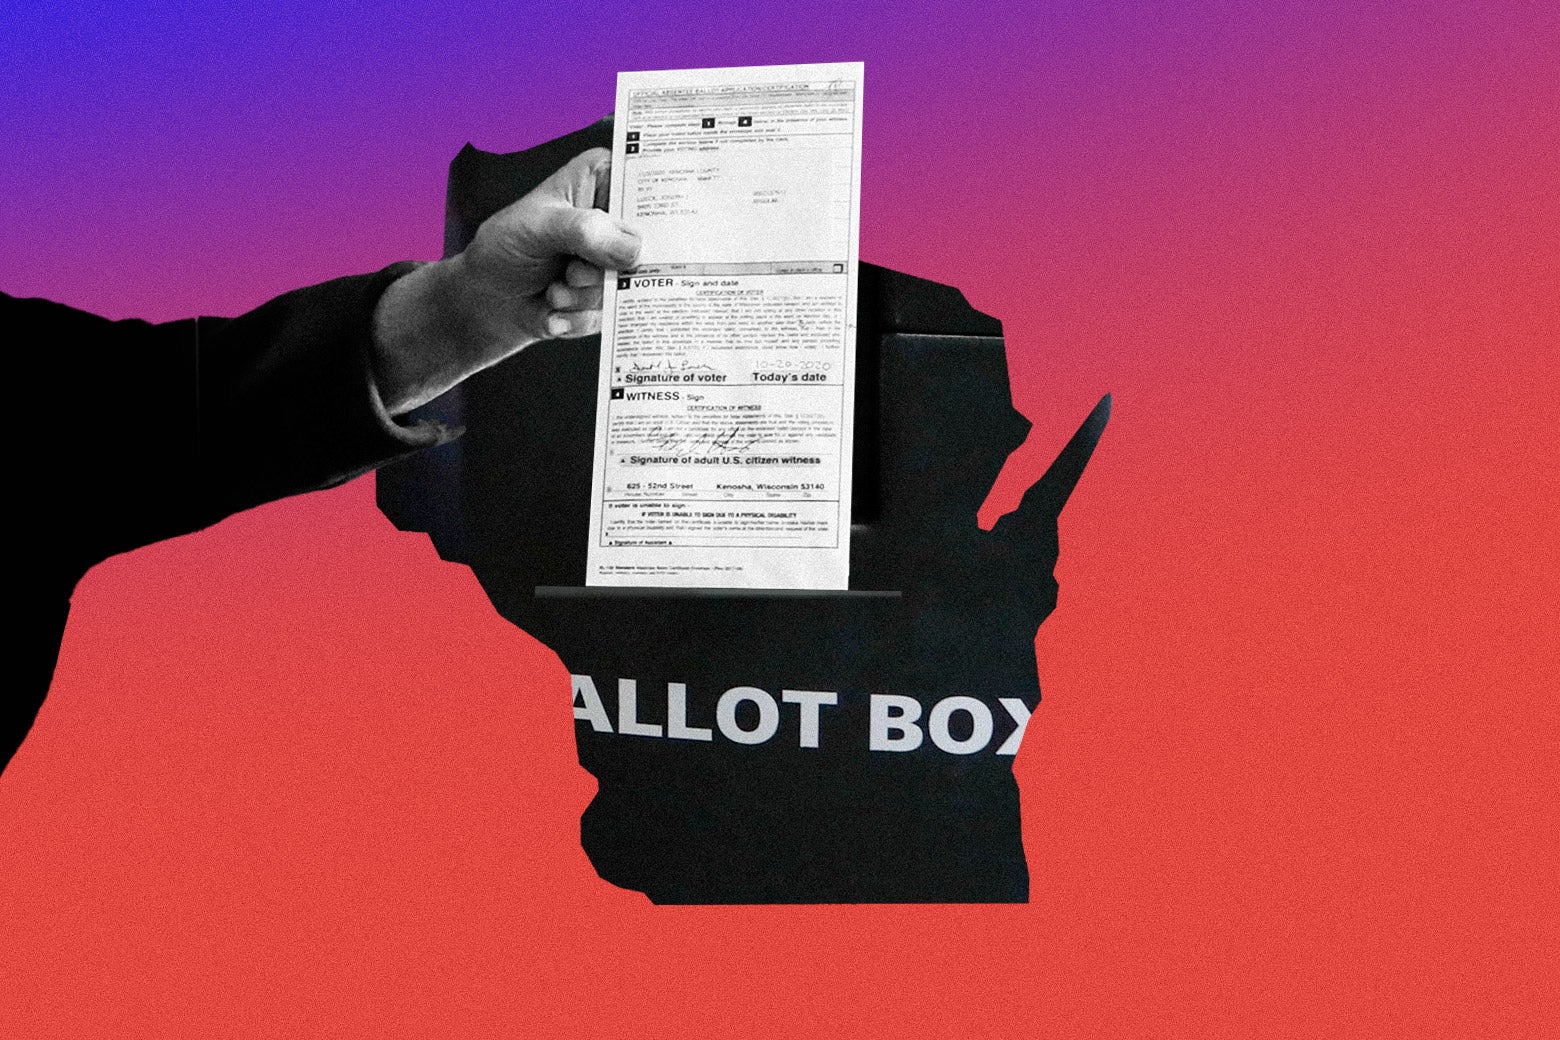 An image of a hand putting a ballot in a box, with an outline of the state of Wisconsin behind it.